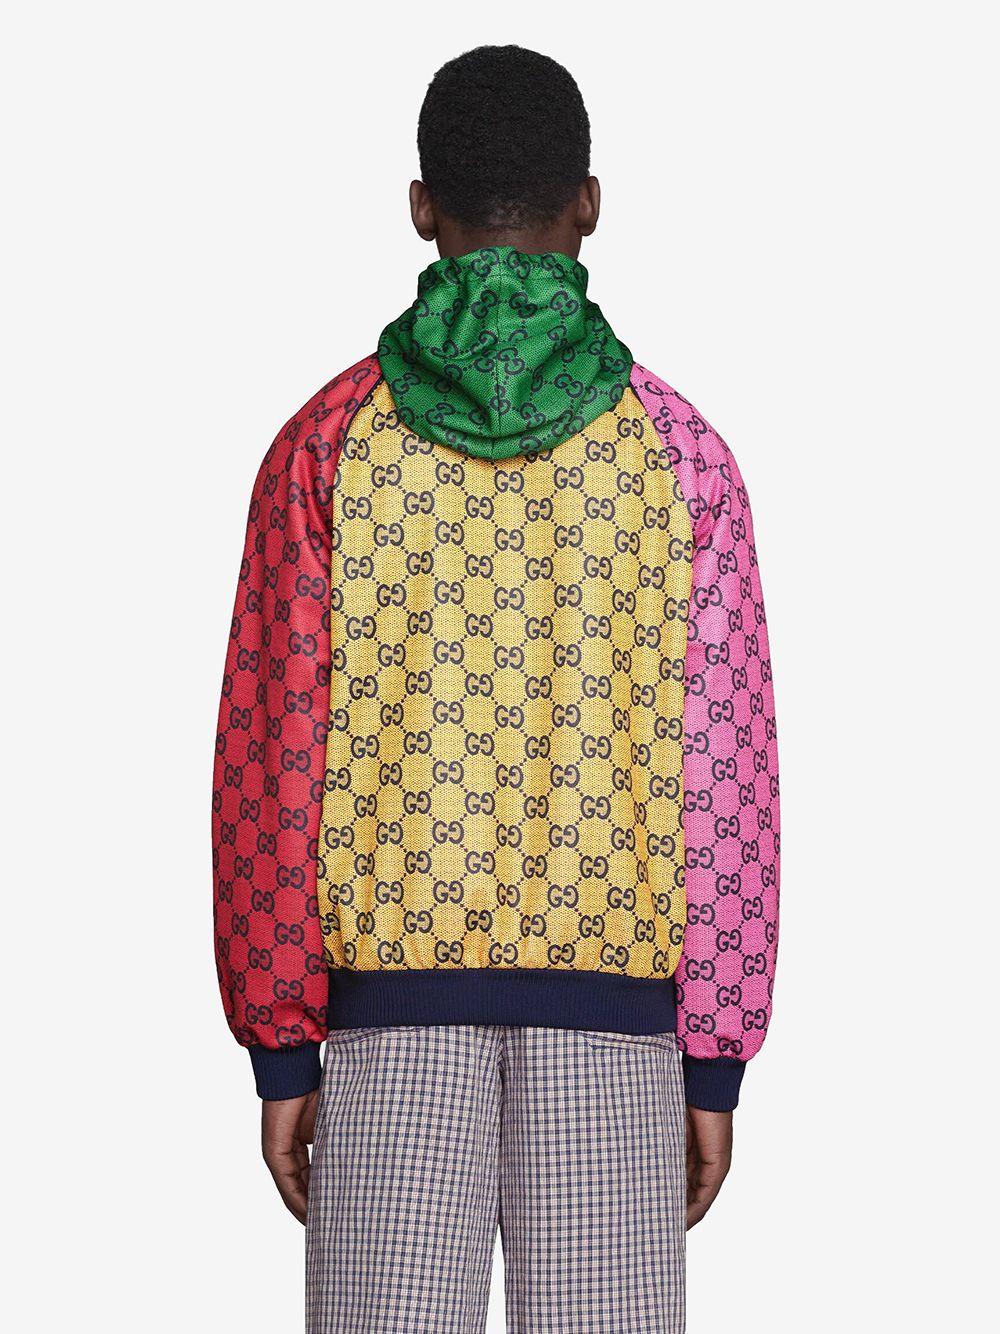 Gucci GG Multicolour Jersey Hoodie in Blue for Men